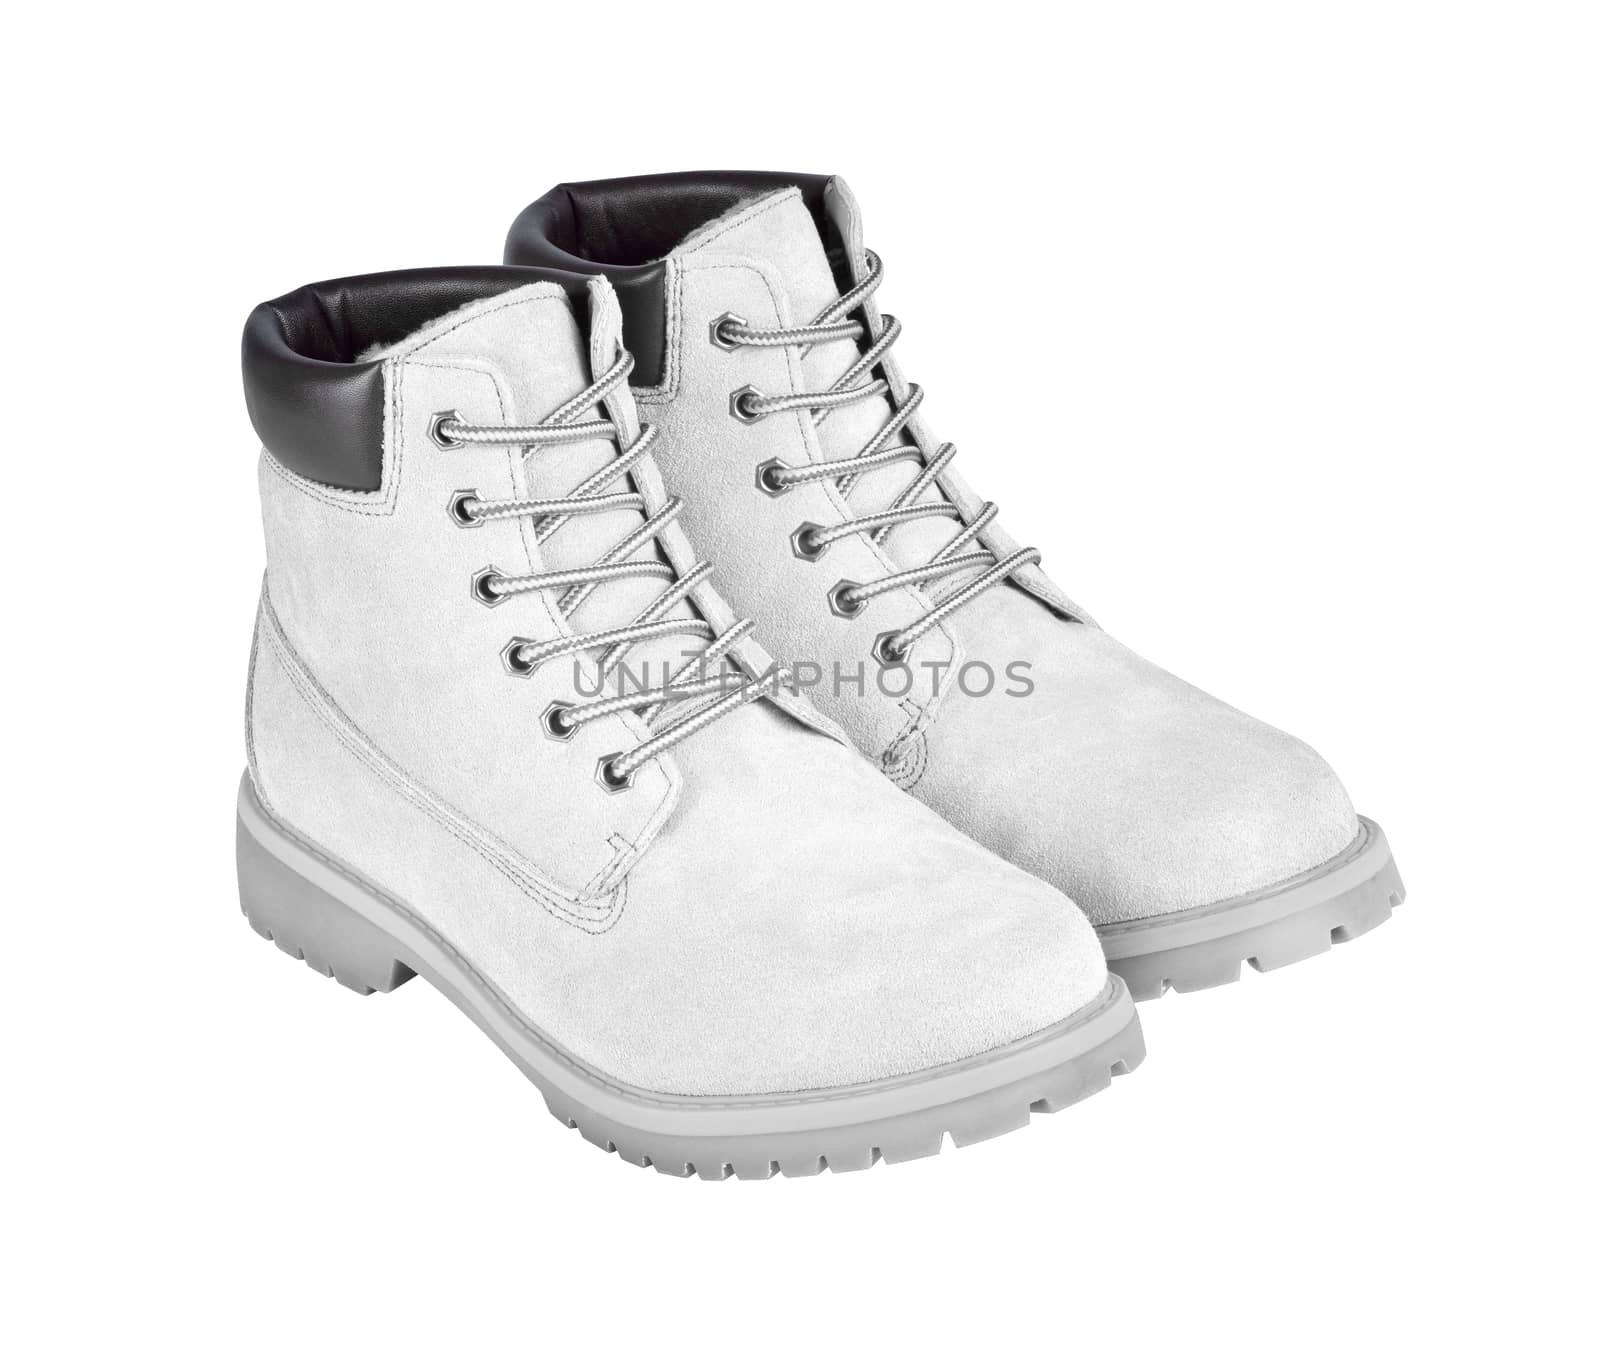 White leather boots isolated on white background w/ clipping path